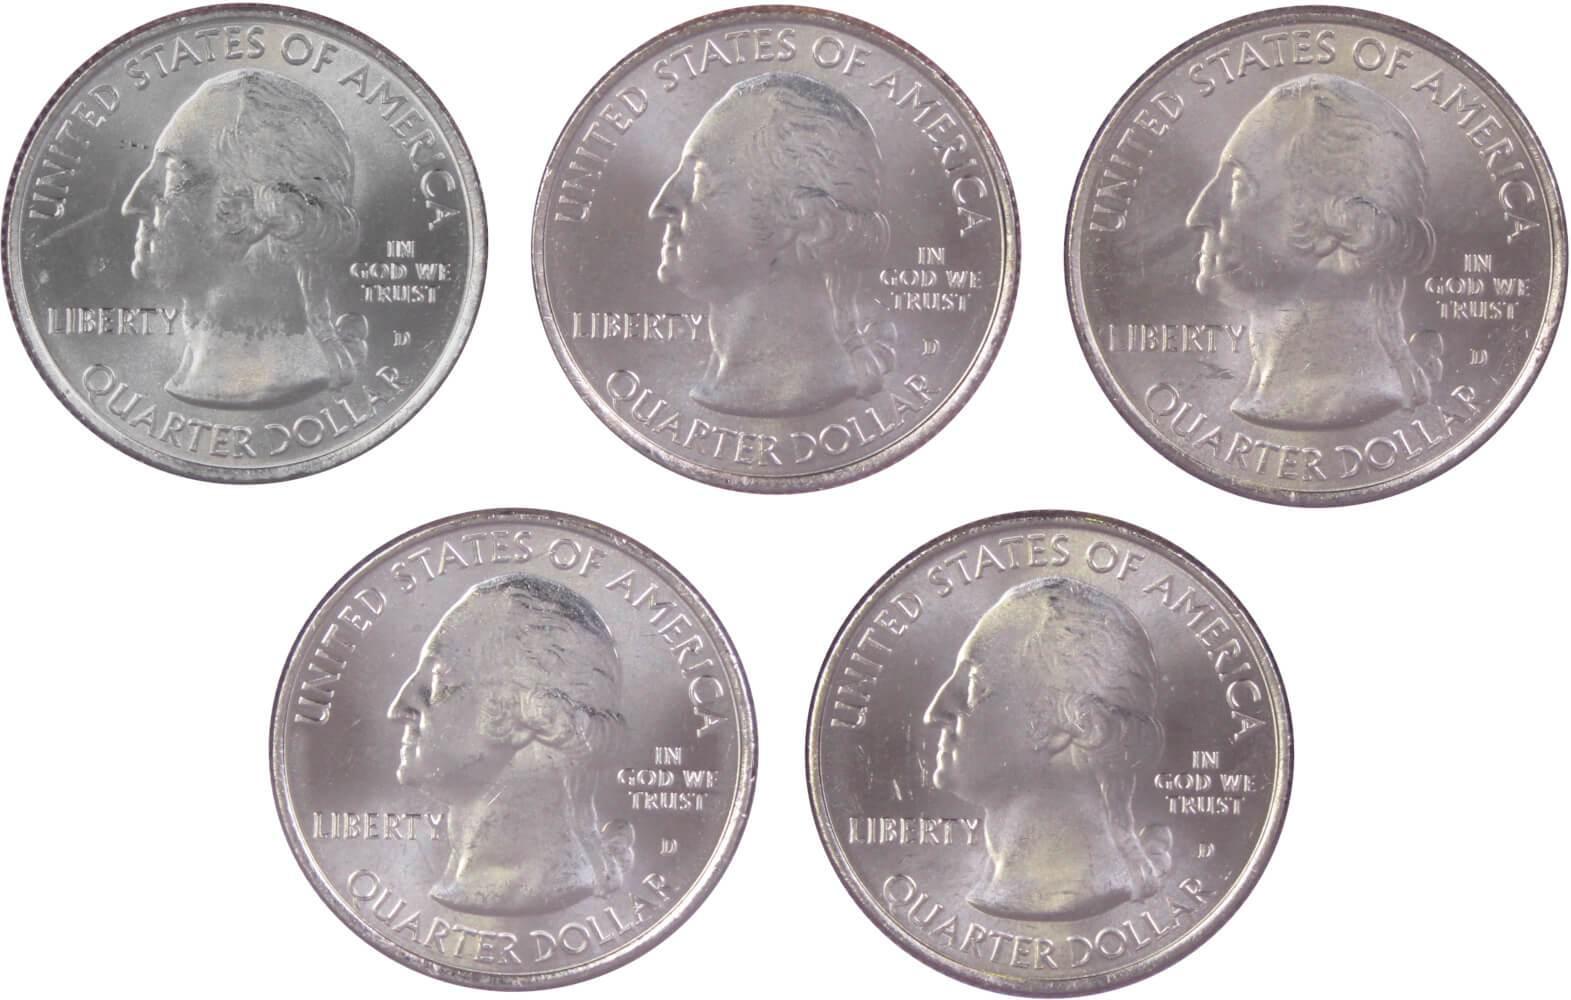 2011 D National Park Quarter 5 Coin Set Uncirculated Mint State 25c Collectible